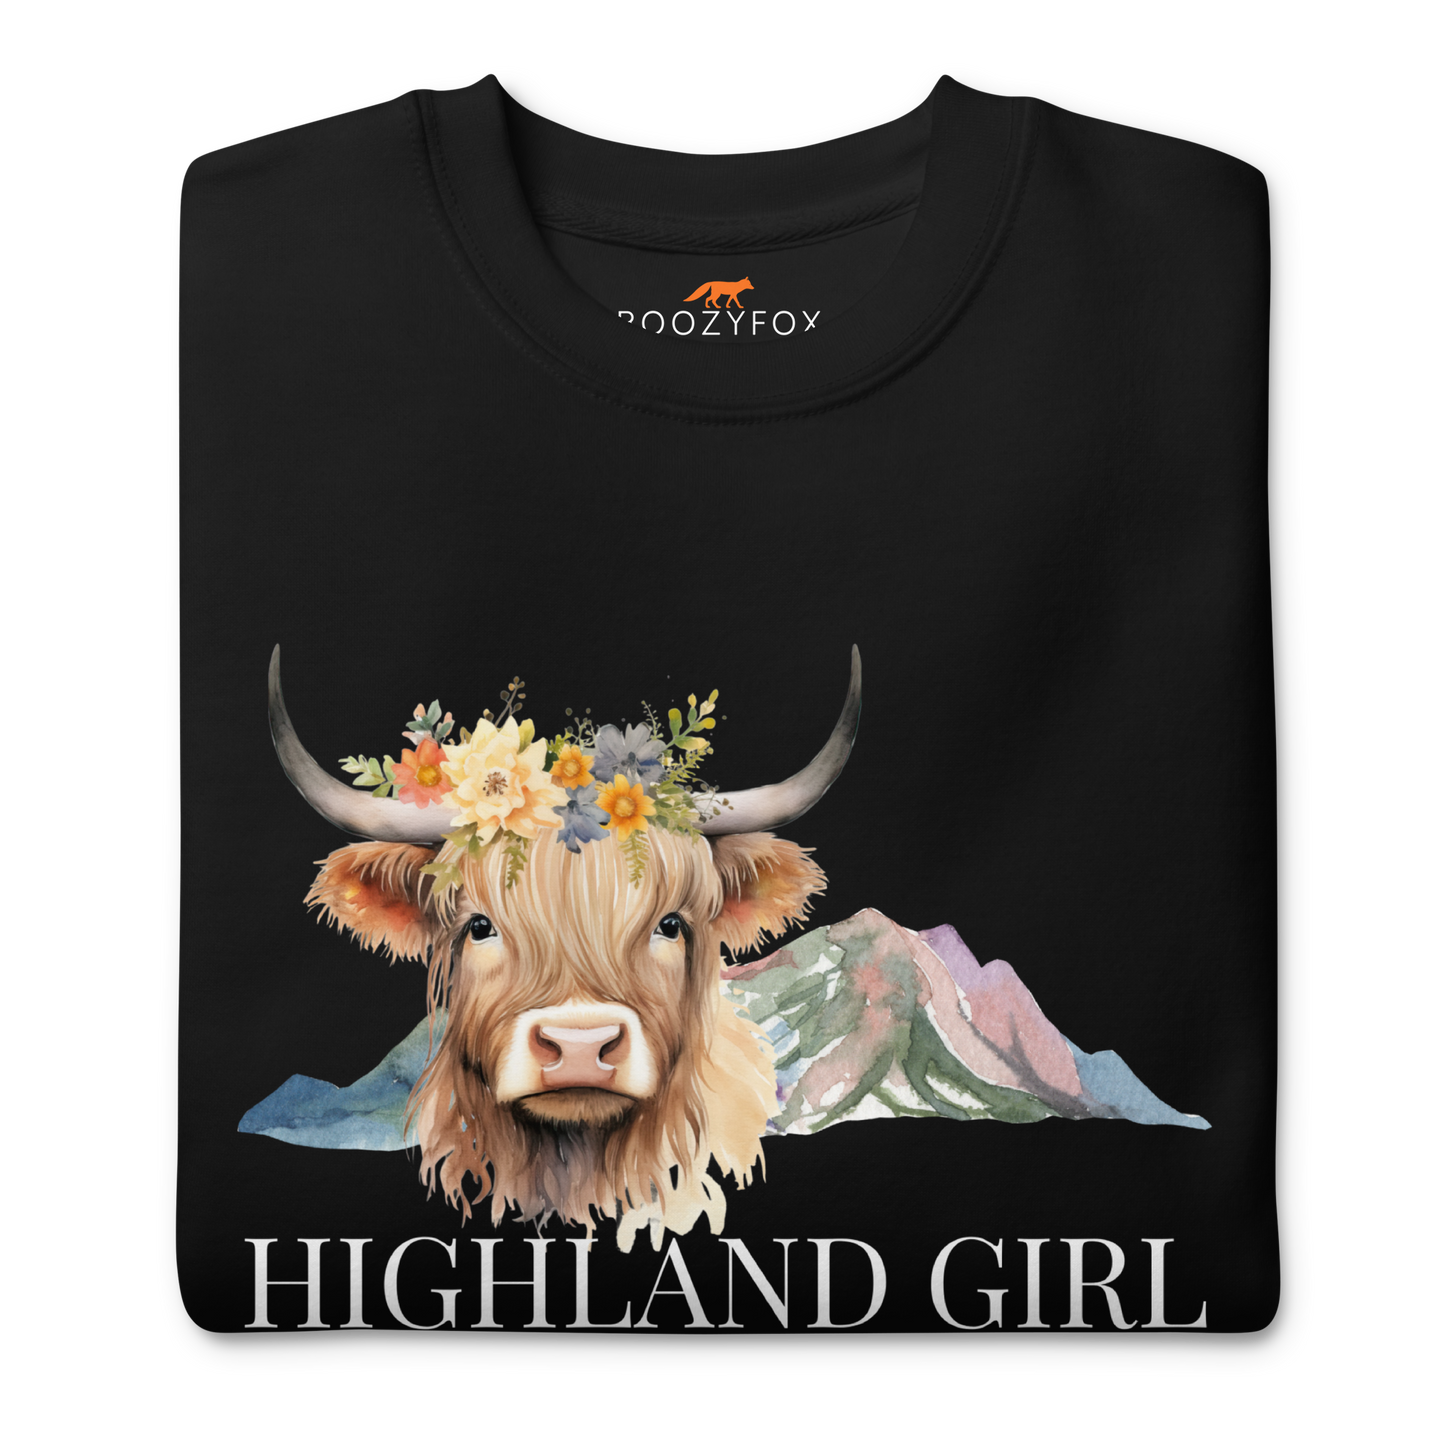 Front details of a Black Premium Highland Cow Sweatshirt featuring an adorable Highland Girl graphic on the chest - Cute Graphic Highland Cow Sweatshirts - Boozy Fox